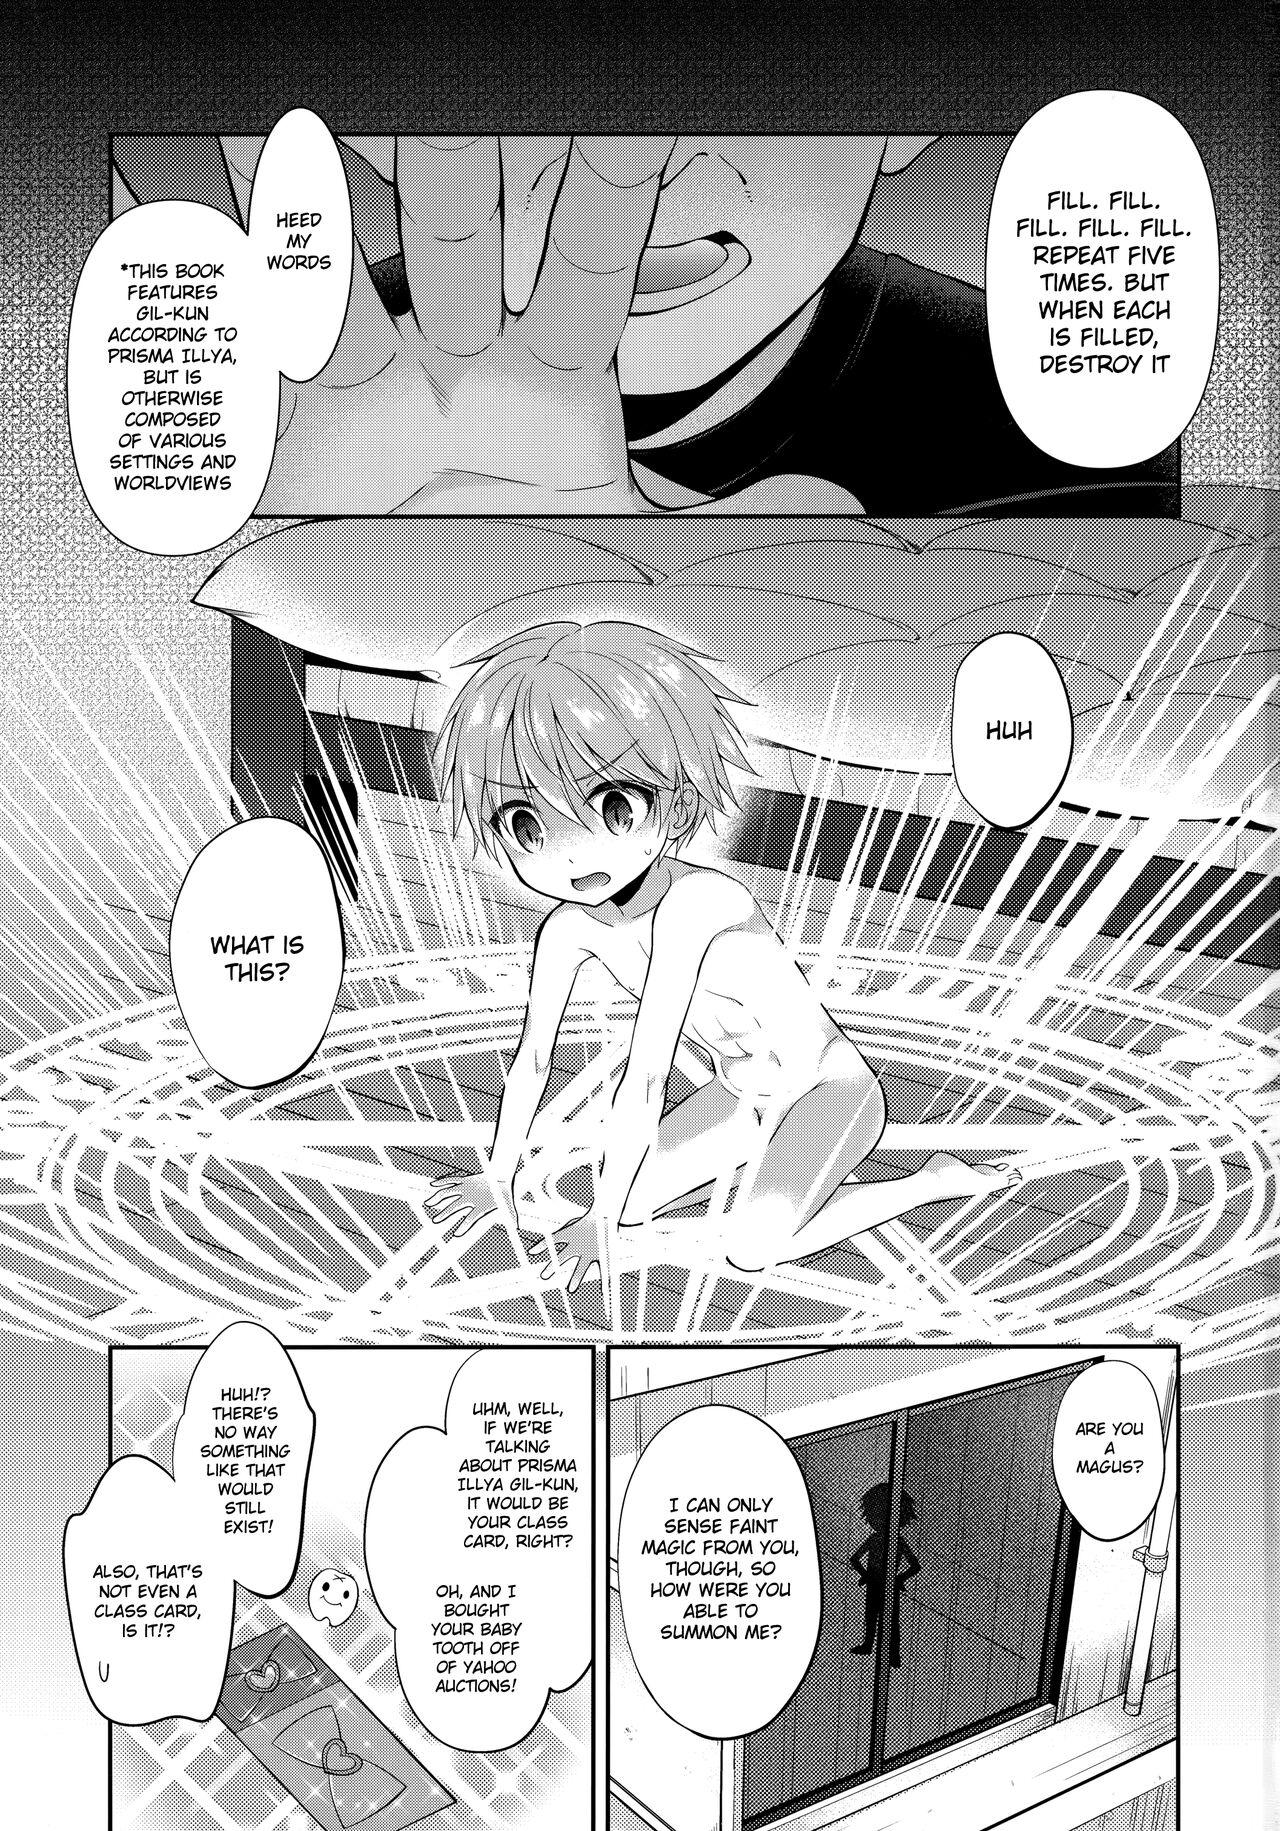 Pussy Eating PRISMA Gil-kun Dry Orgasm!! - Fate grand order Smooth - Page 2